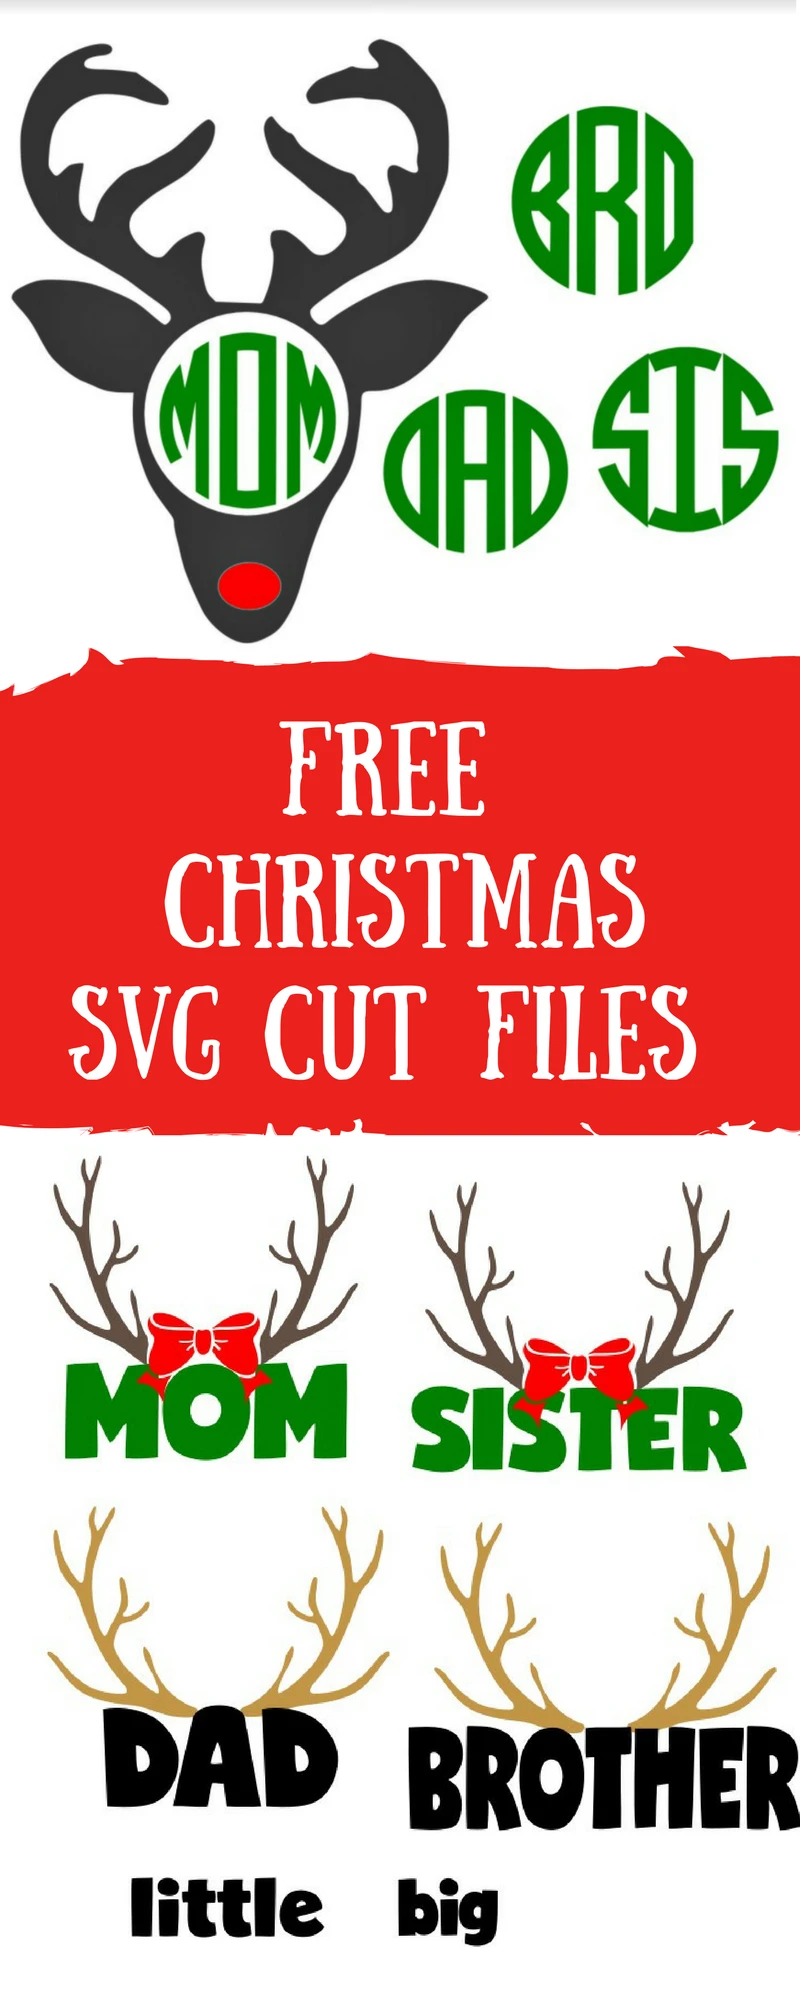 Download Deer Head Svg Free File To Make Family Christmas Pajamas Leap Of Faith Crafting